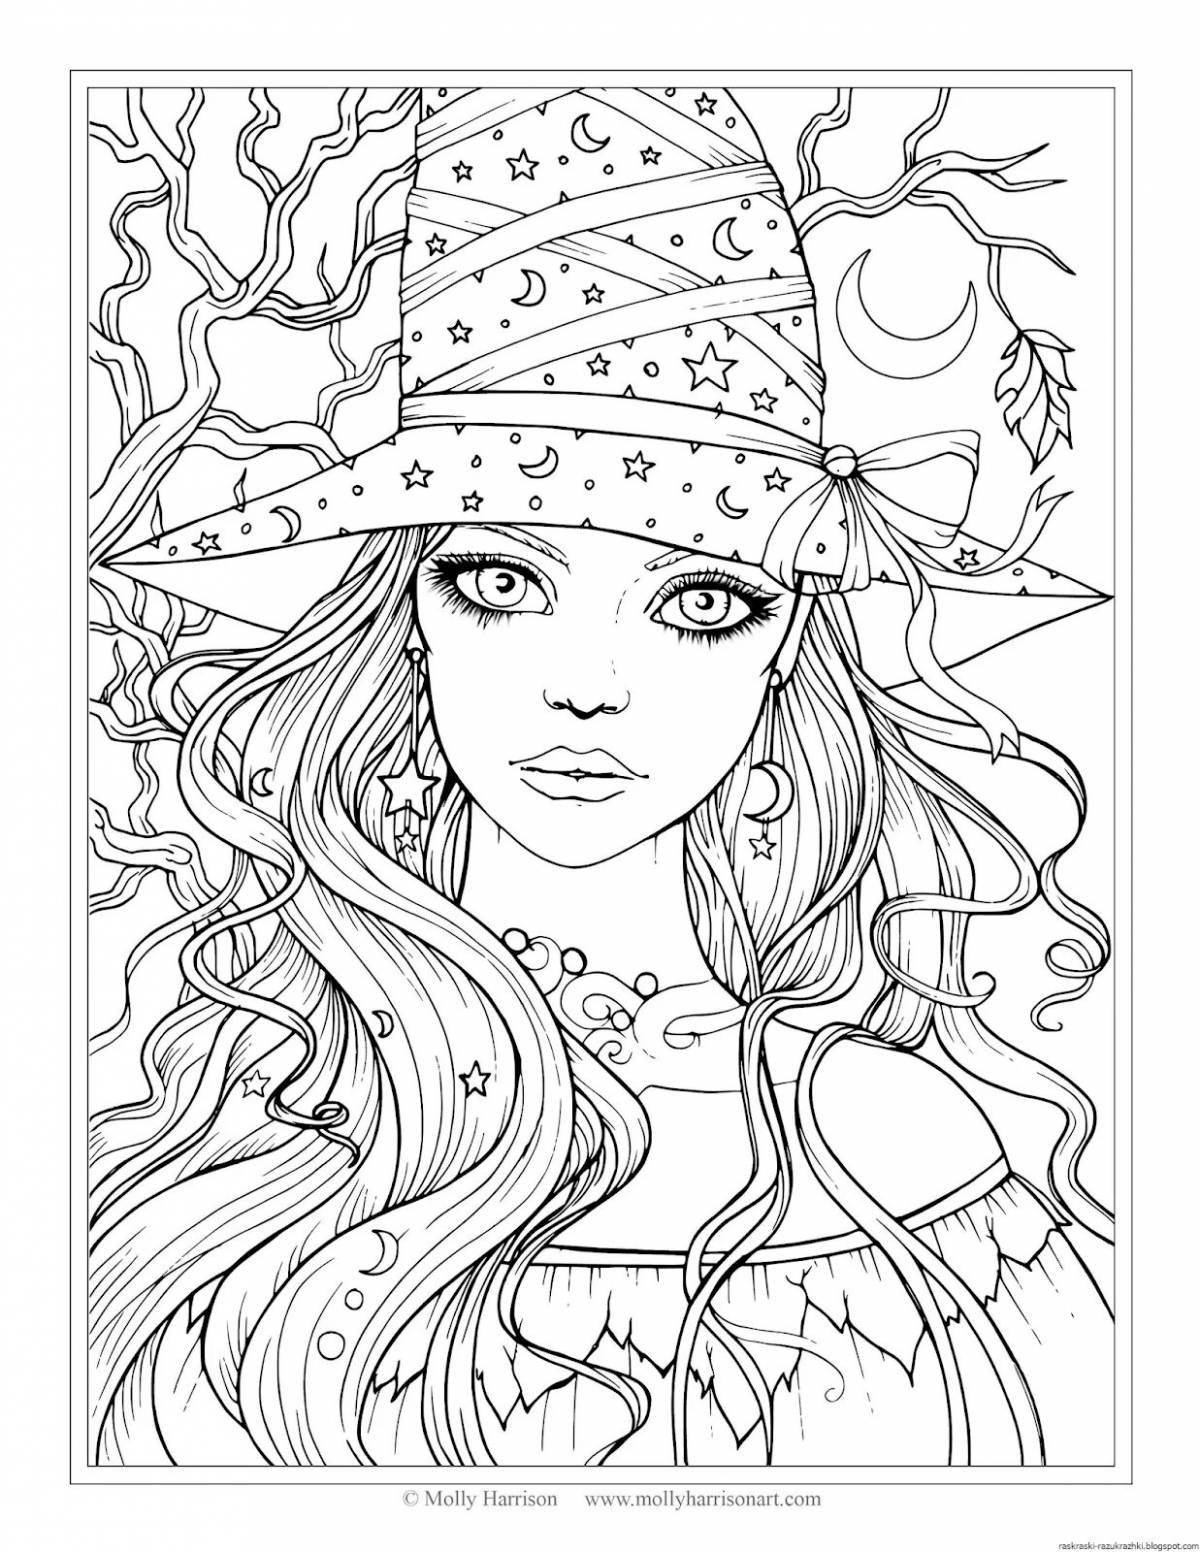 Calm 15 year old anti-stress coloring book